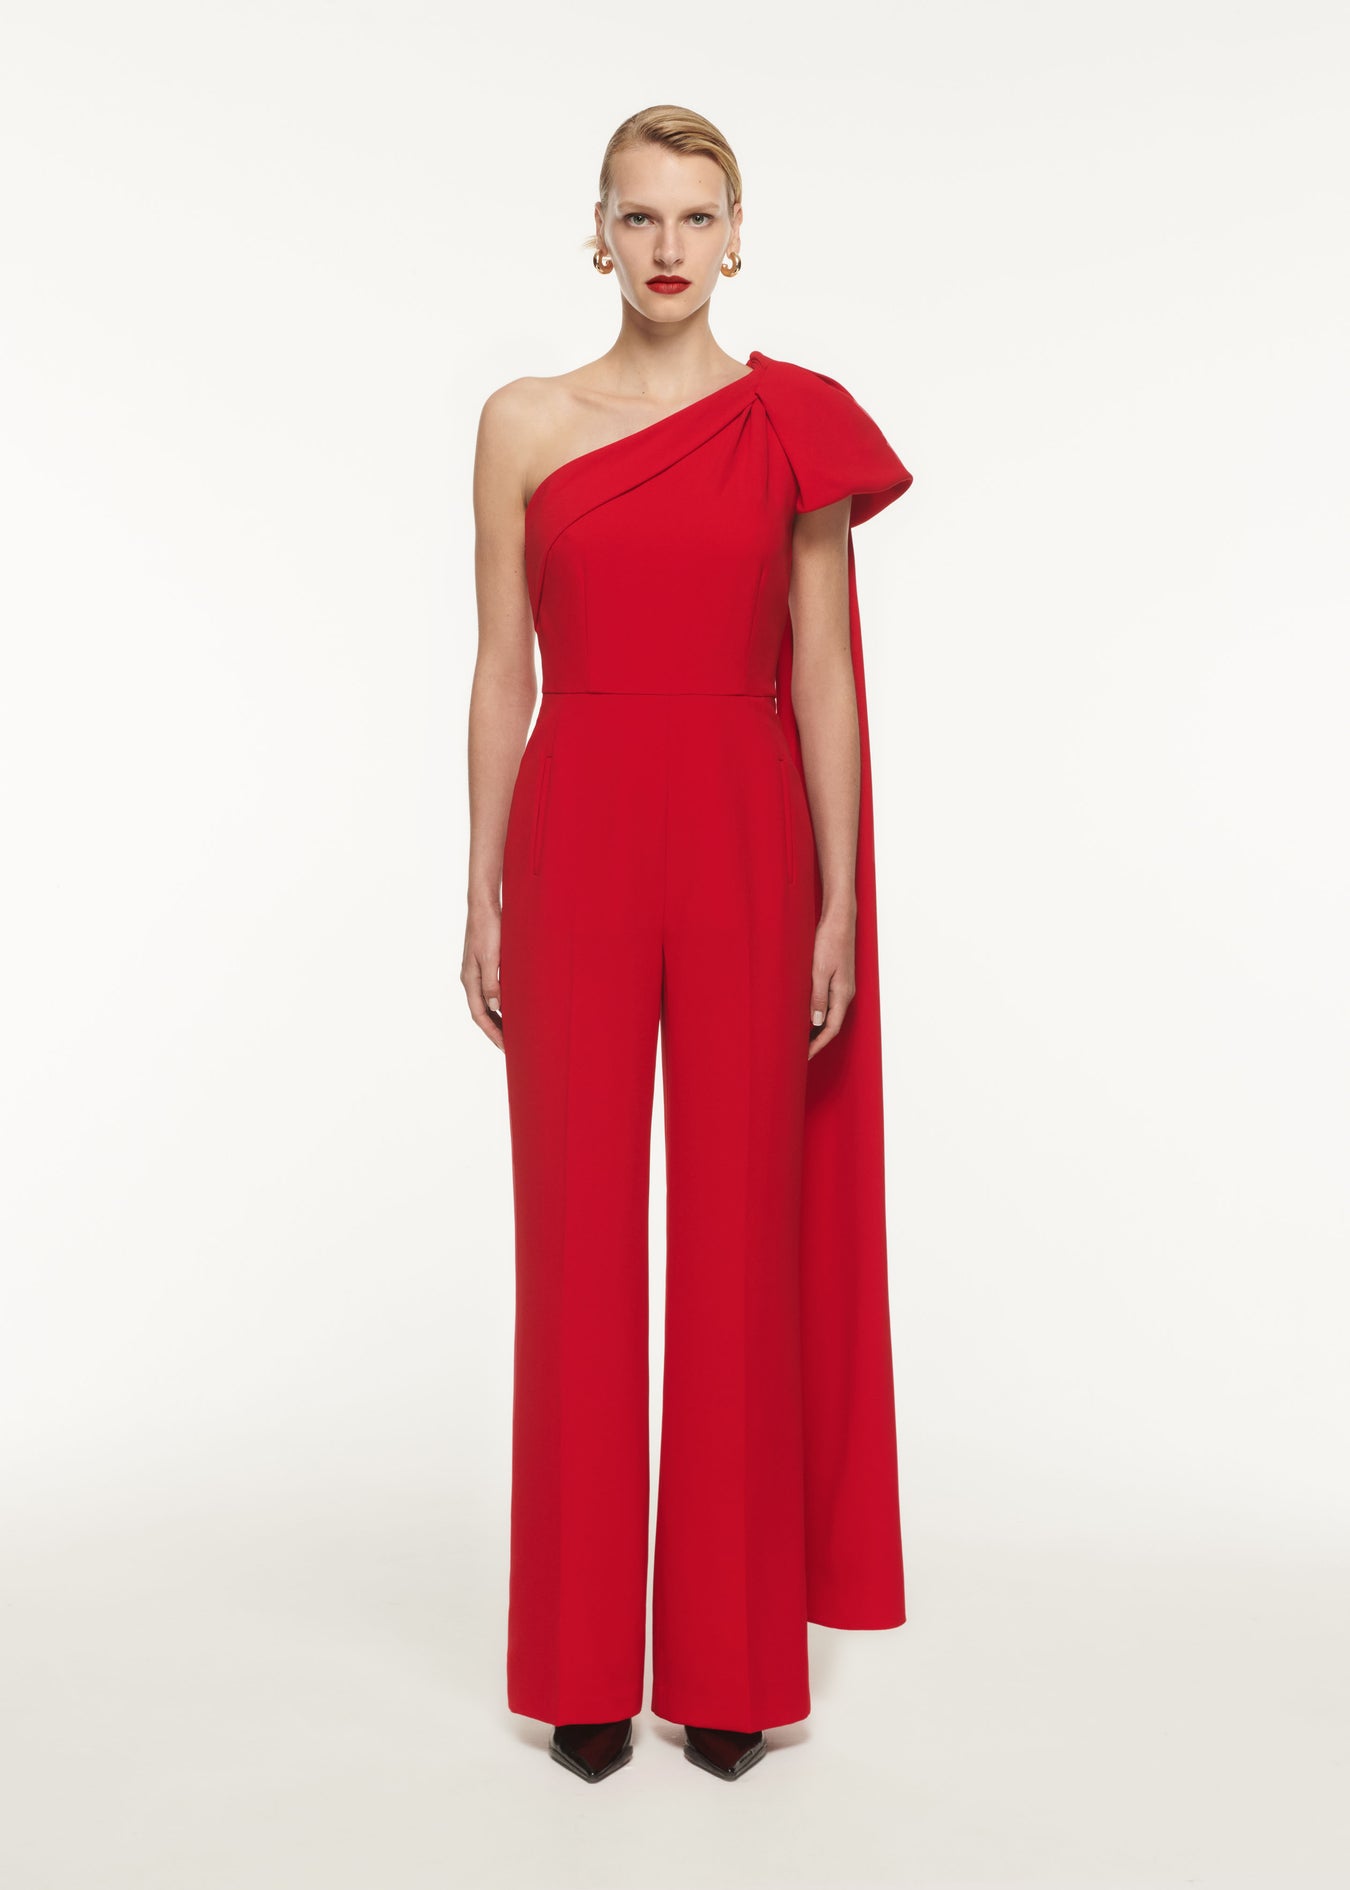 A woman wearing the Asymmetric Stretch Cady Jumpsuit in Red